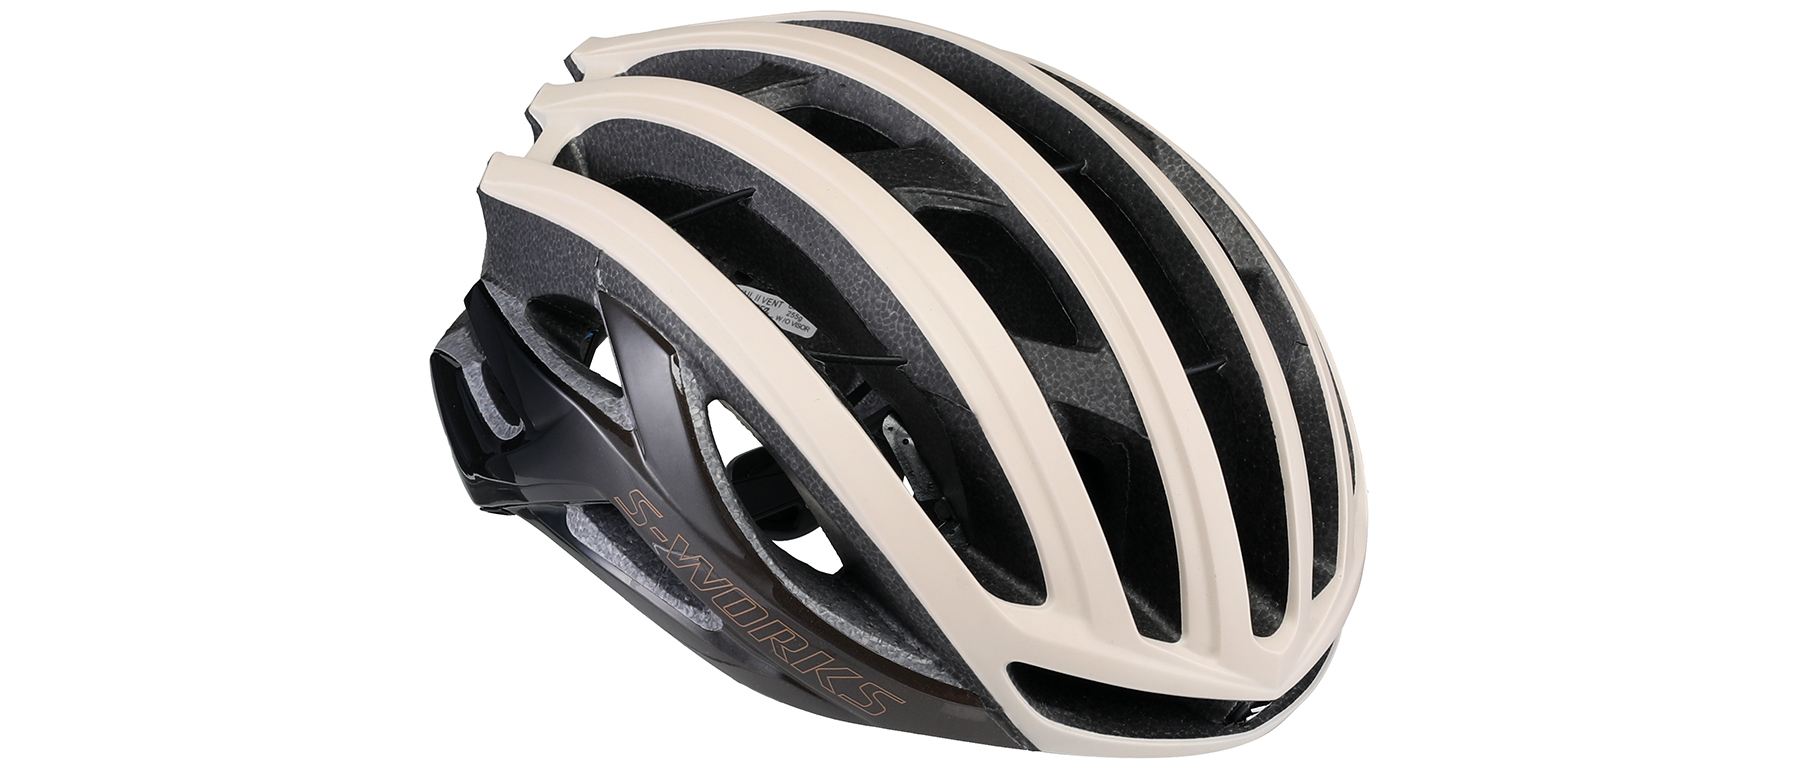 Specialized S-Works Prevail II Vent ANGi Helmet